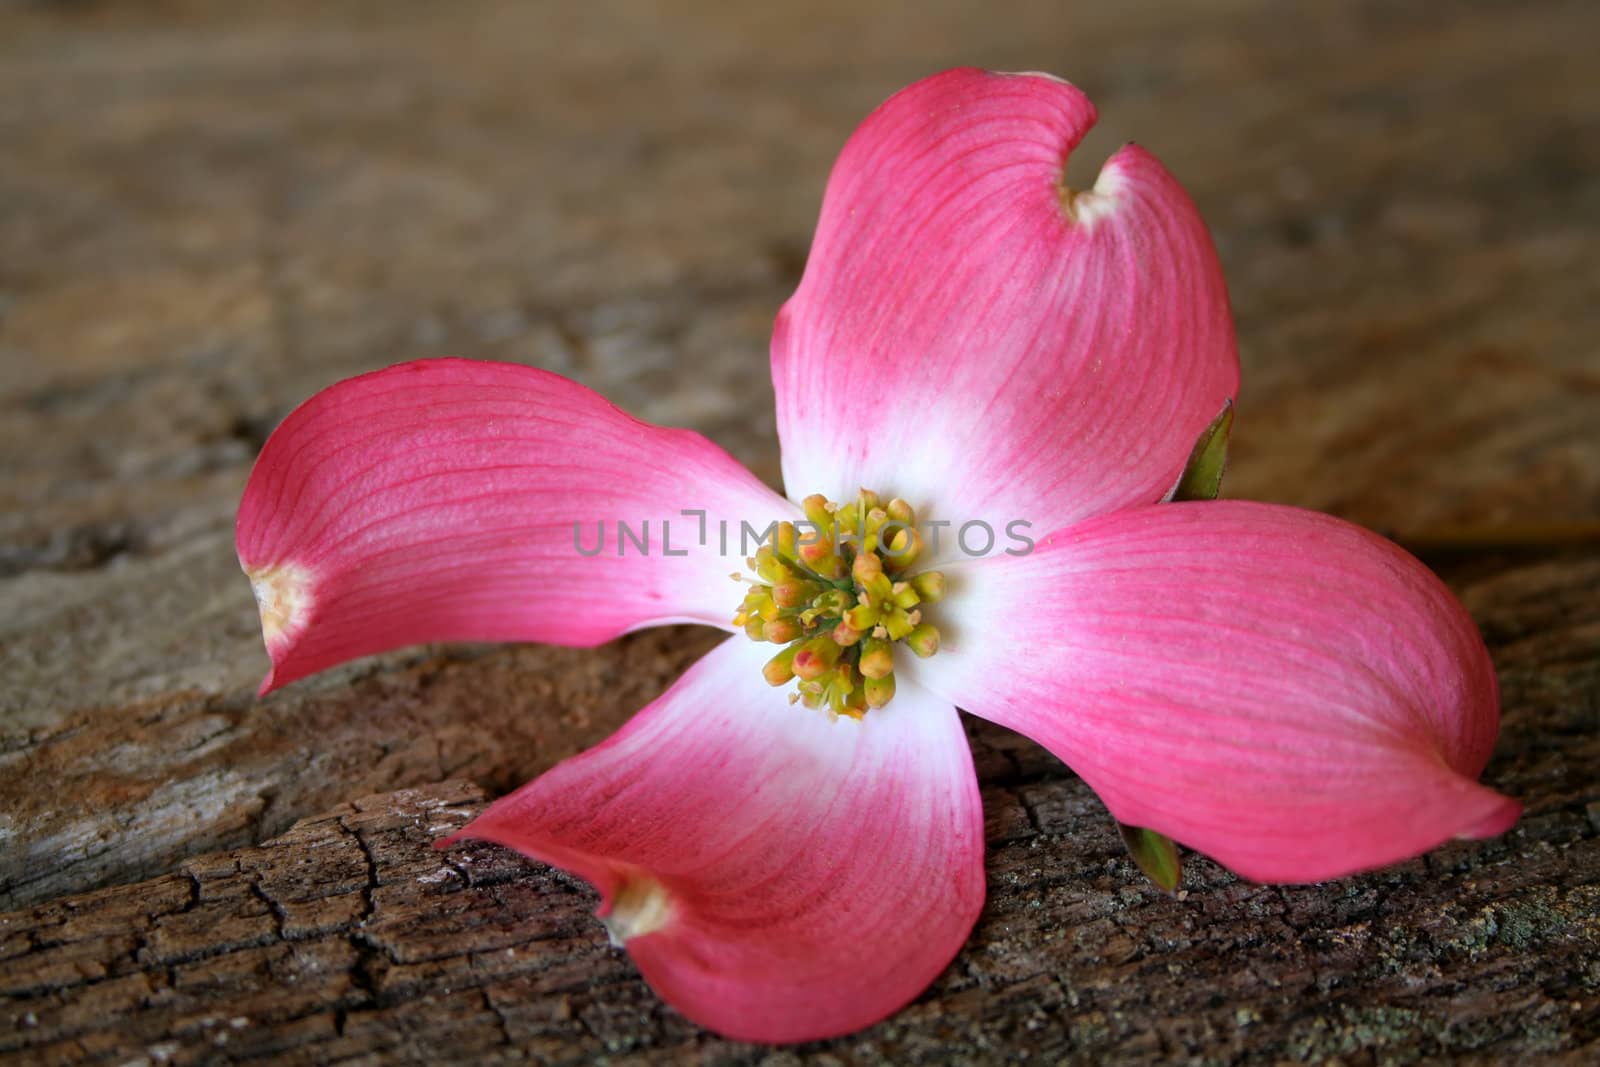 A beautiful pink dogwood bloom on an old piece of wood for a textured background.